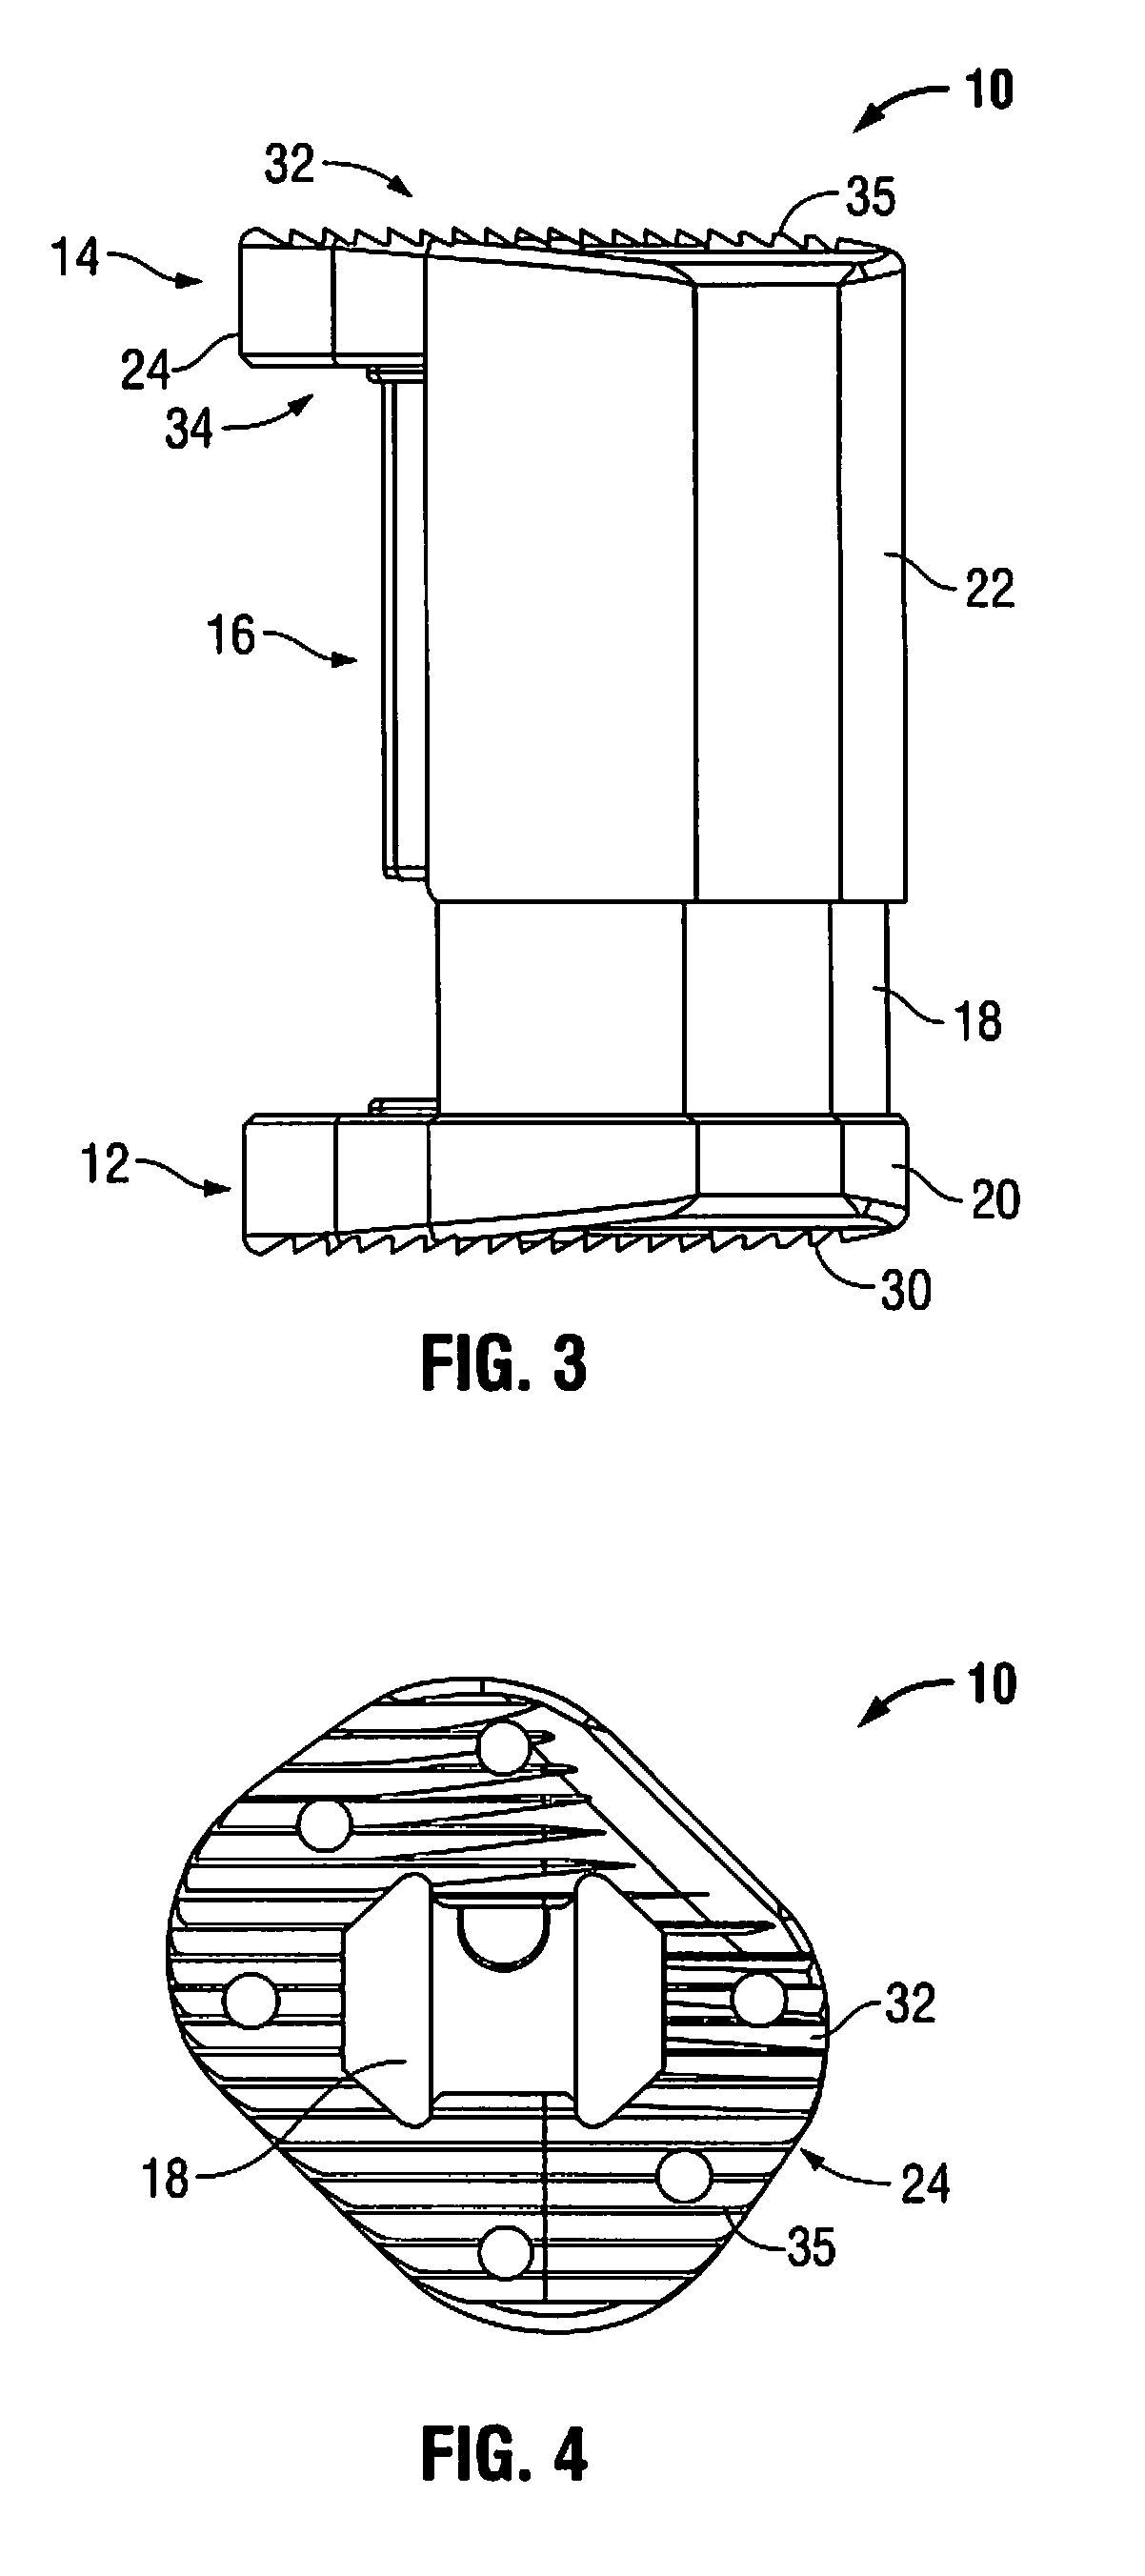 Expandable vertebral device with cam lock